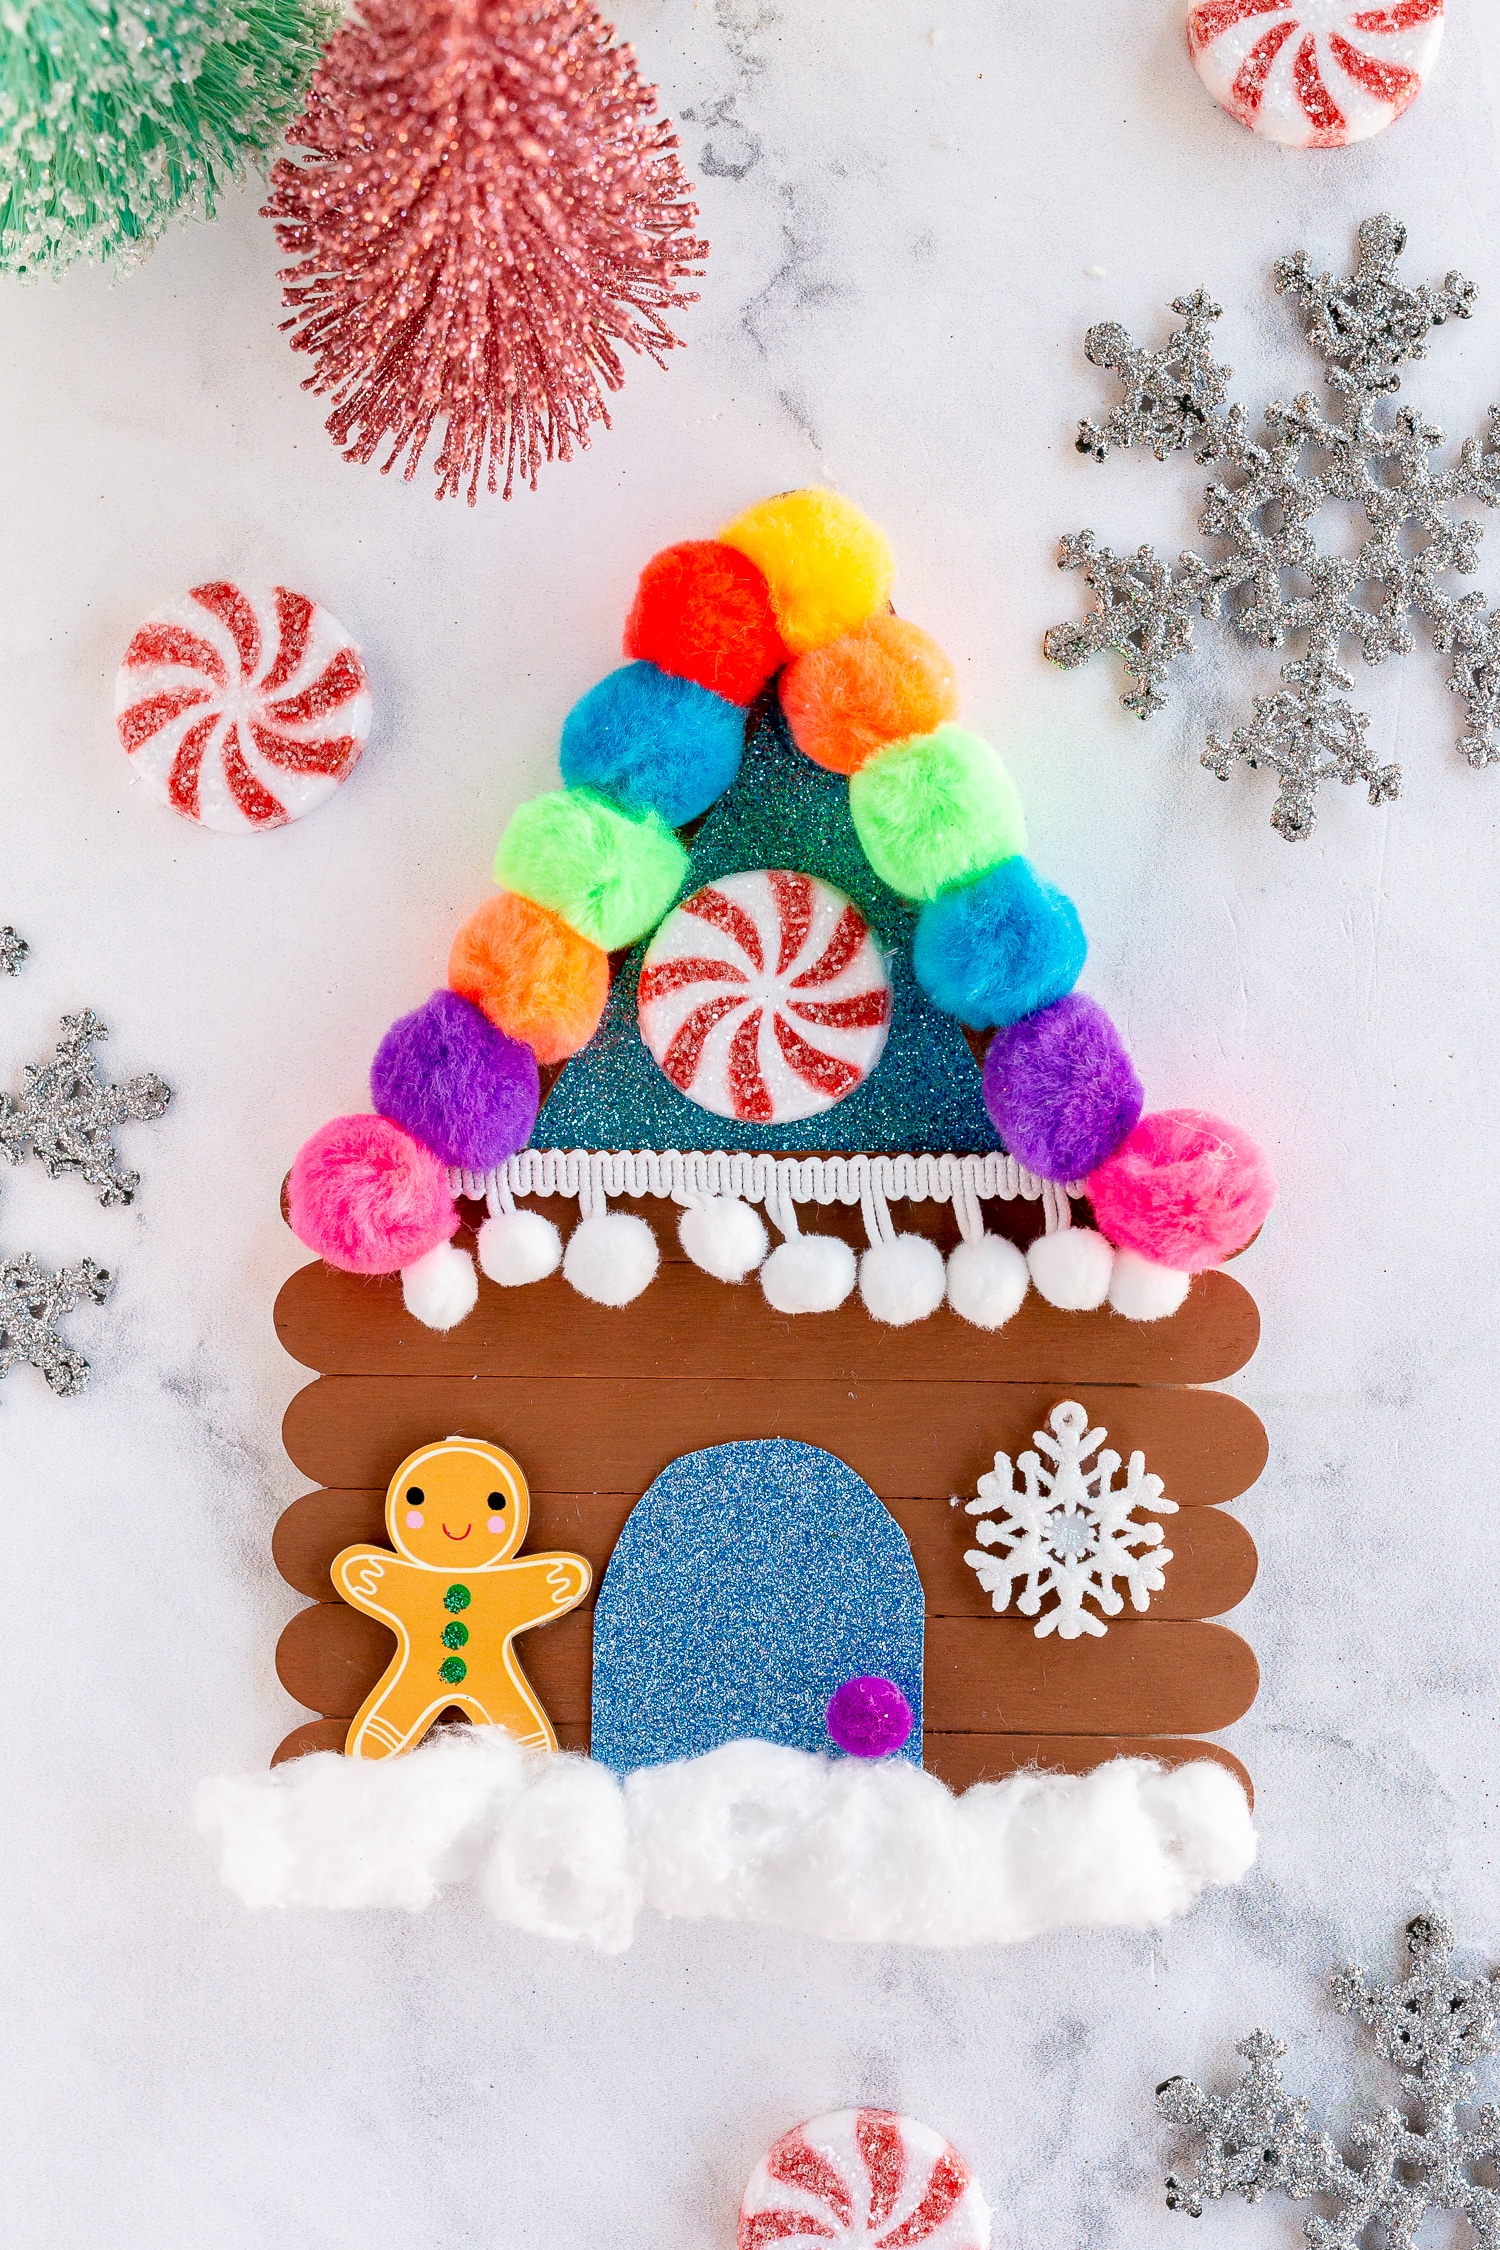 finished gingerbread house with mini decoration pieces